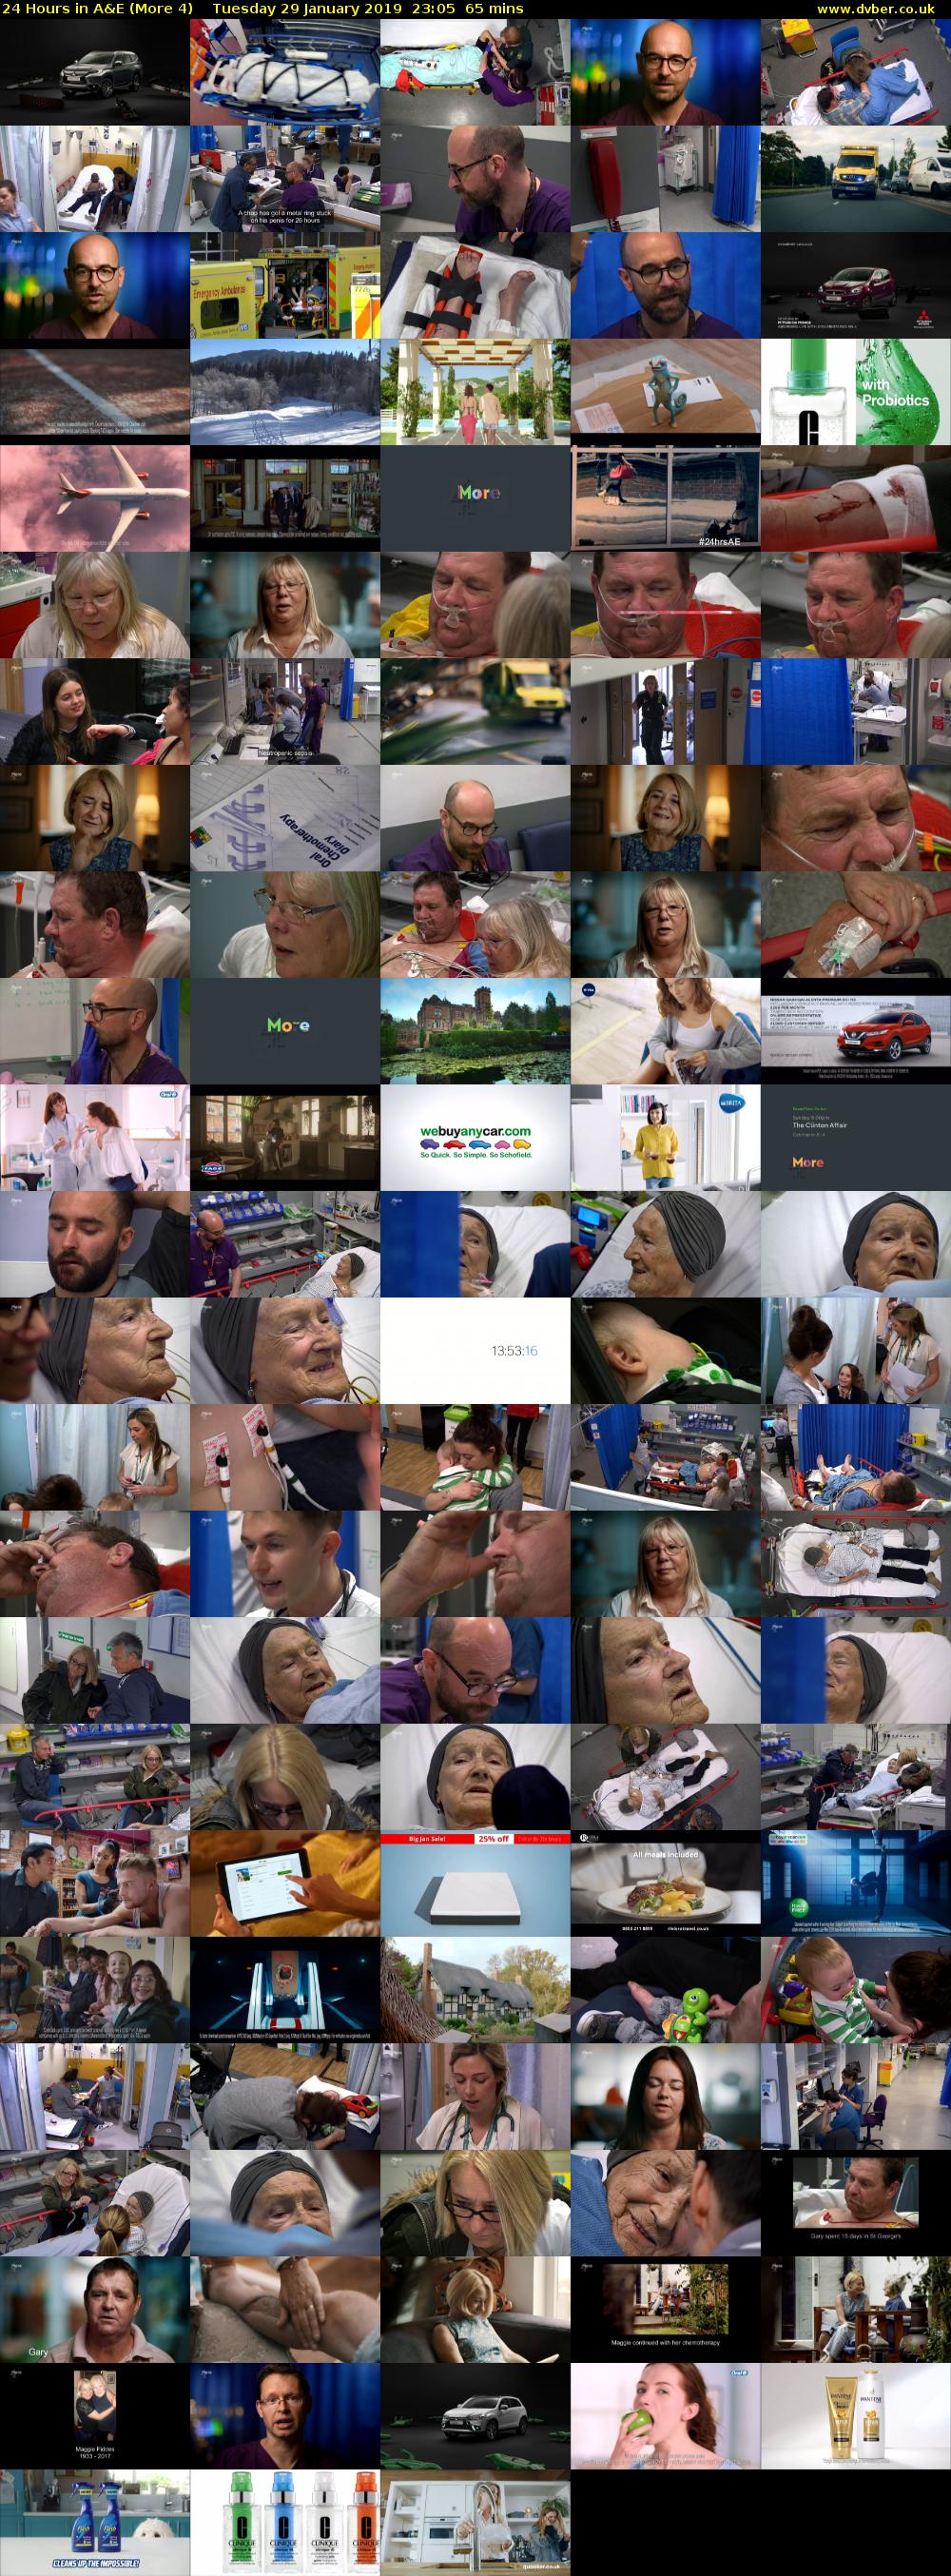 24 Hours in A&E (More 4) Tuesday 29 January 2019 23:05 - 00:10